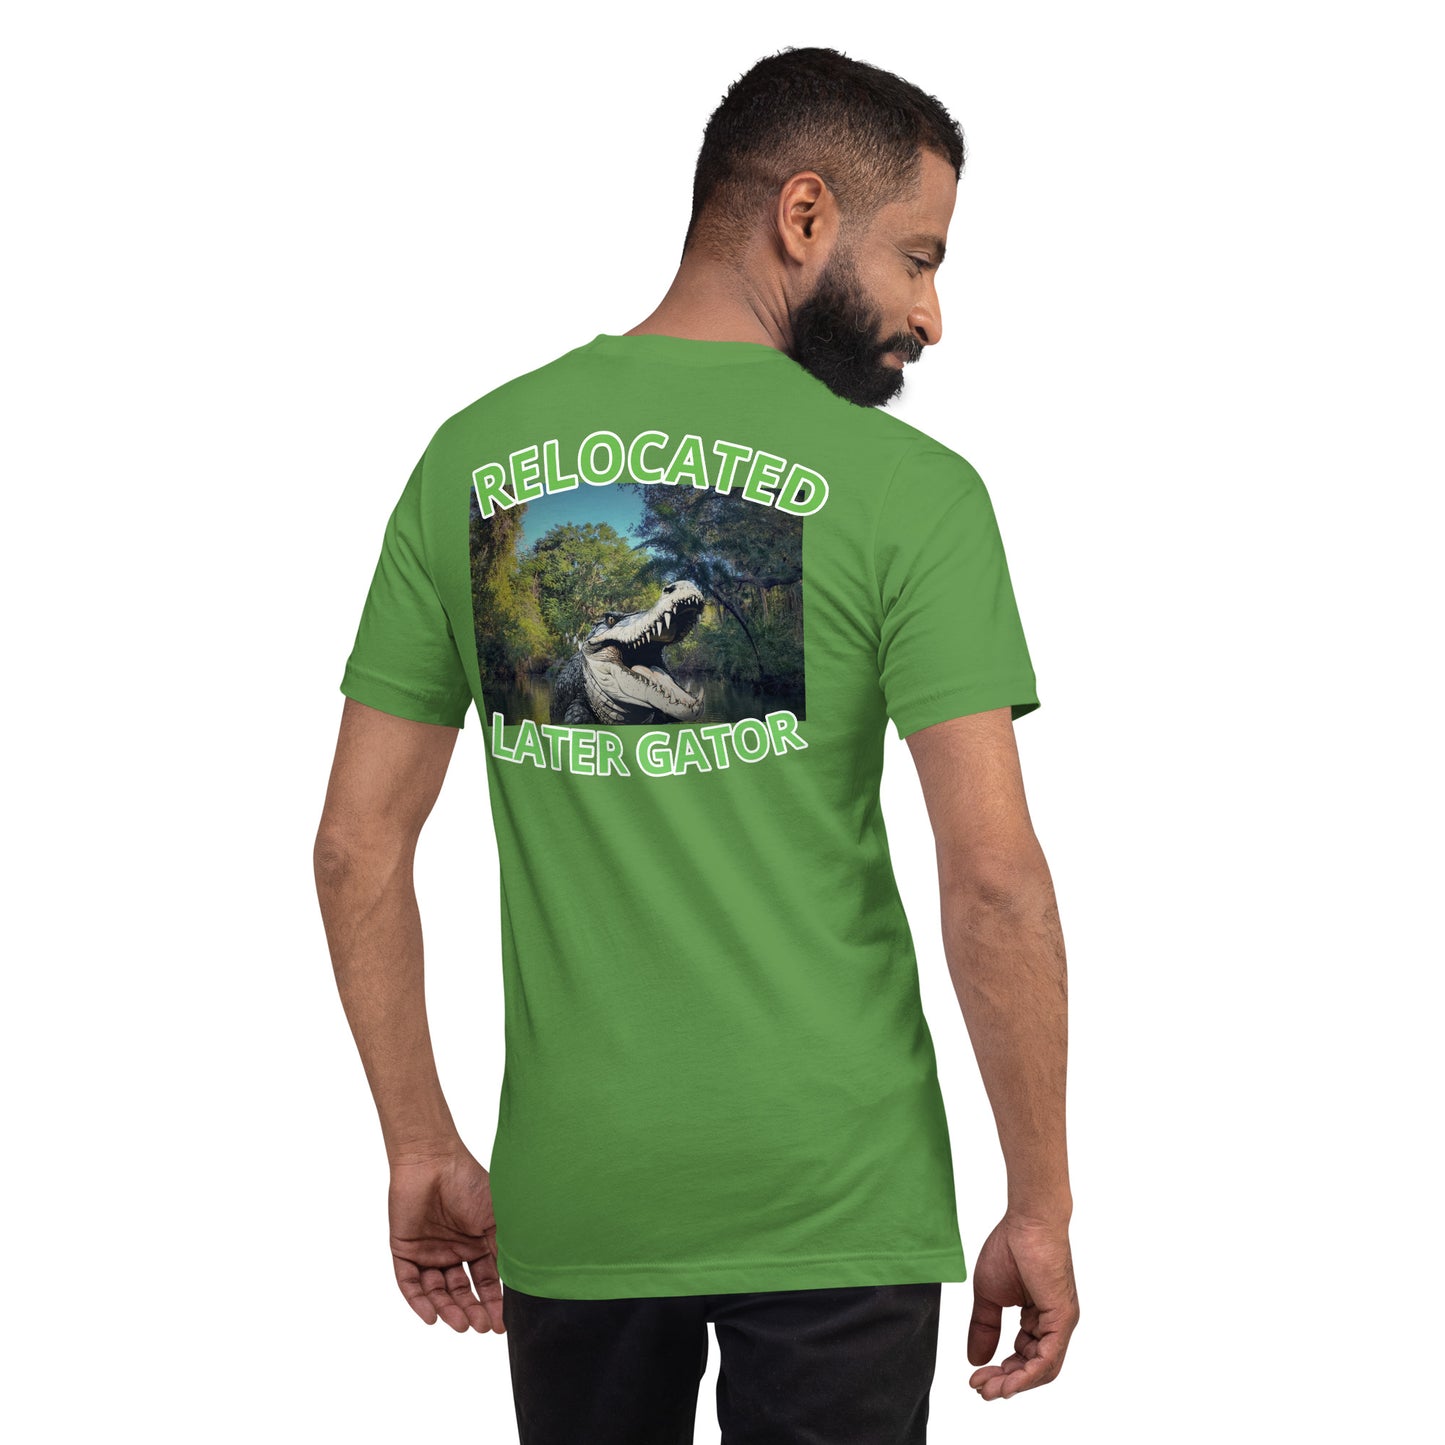 FLadopted Later Gator Unisex t-shirt